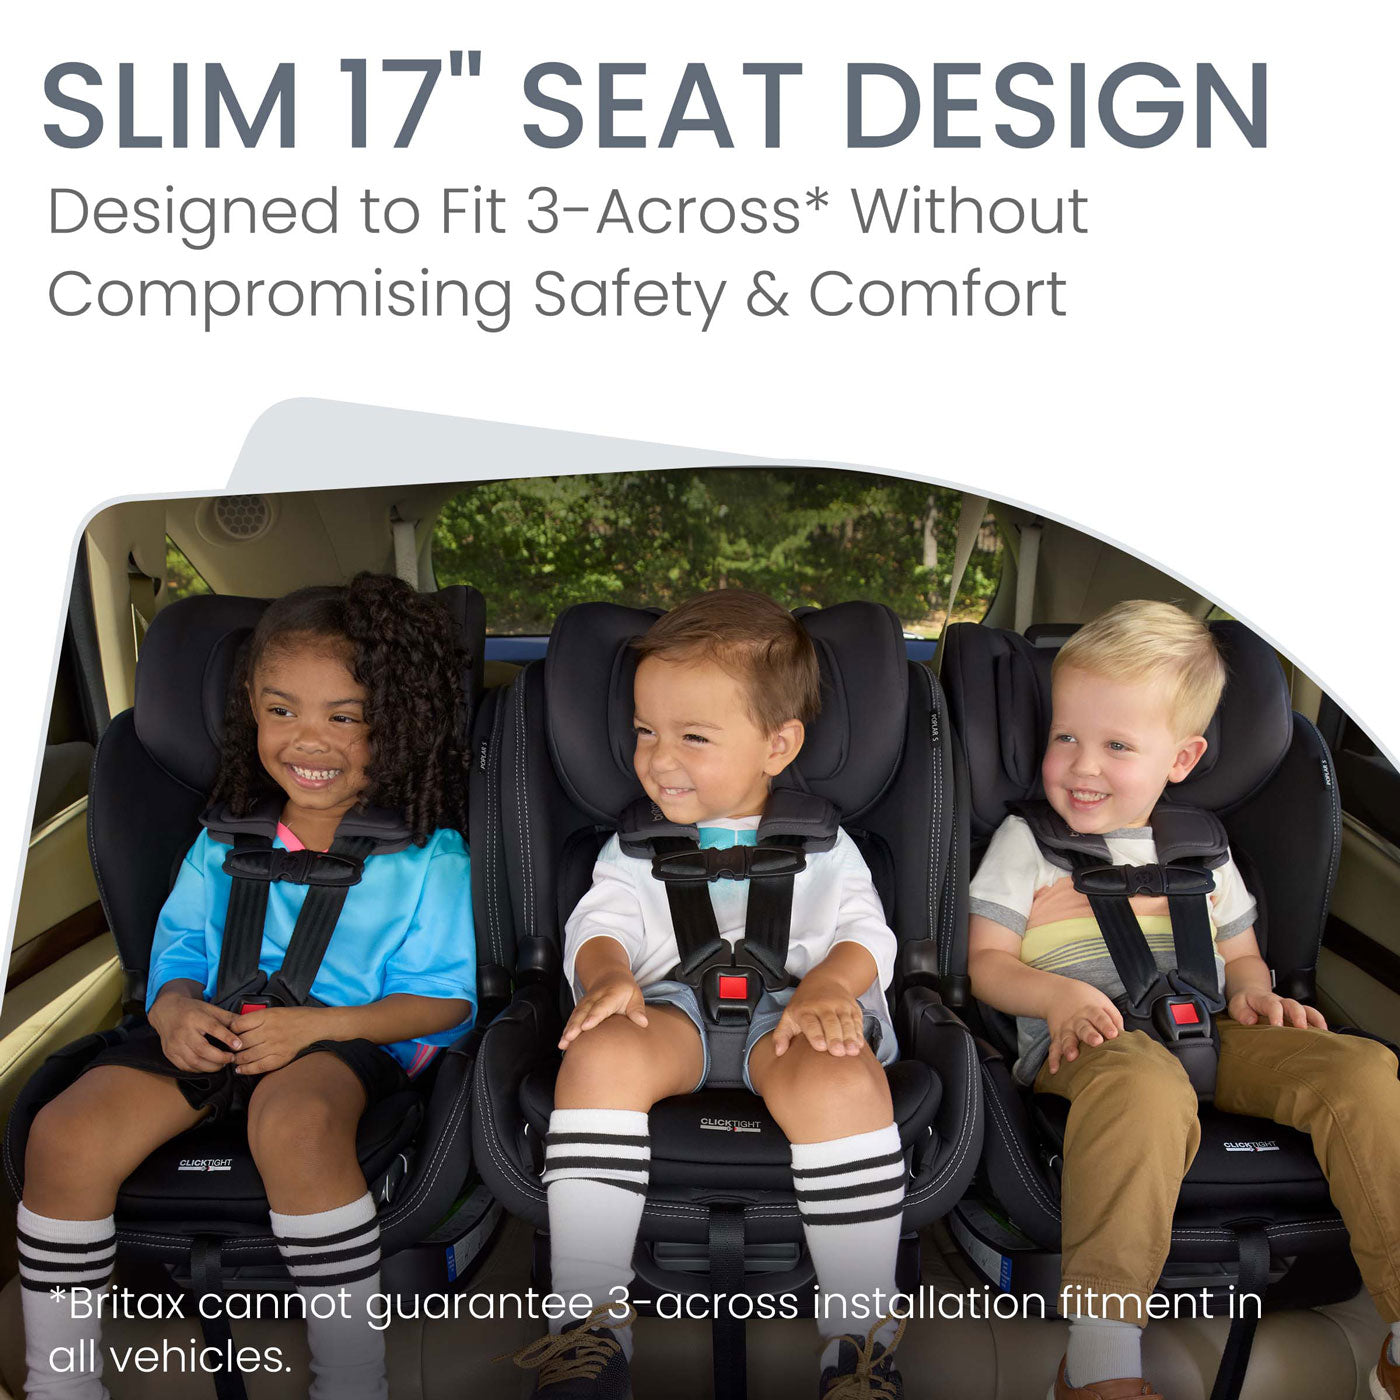 3 children riding side by side in Britax Poplar S ClickTight Convertible Car Seat - Onyx